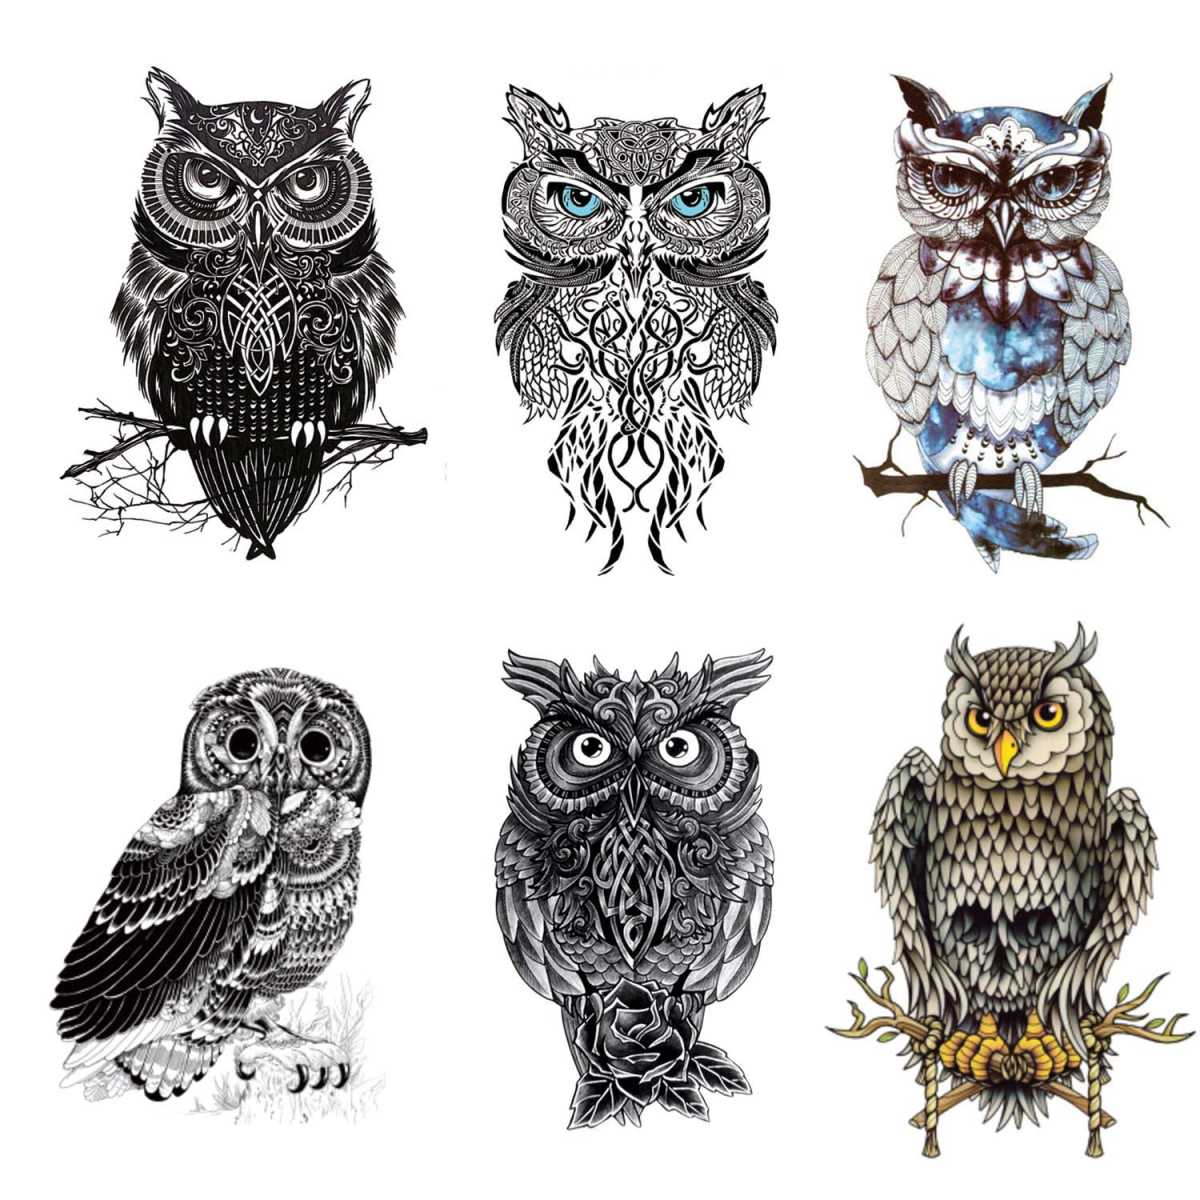 Owl Temporary Tattoos Large Temporary Tattoo Half Arm Tattoo Sleeves  Stickers Shoulder Body Art for Men Women Teens- Sheets